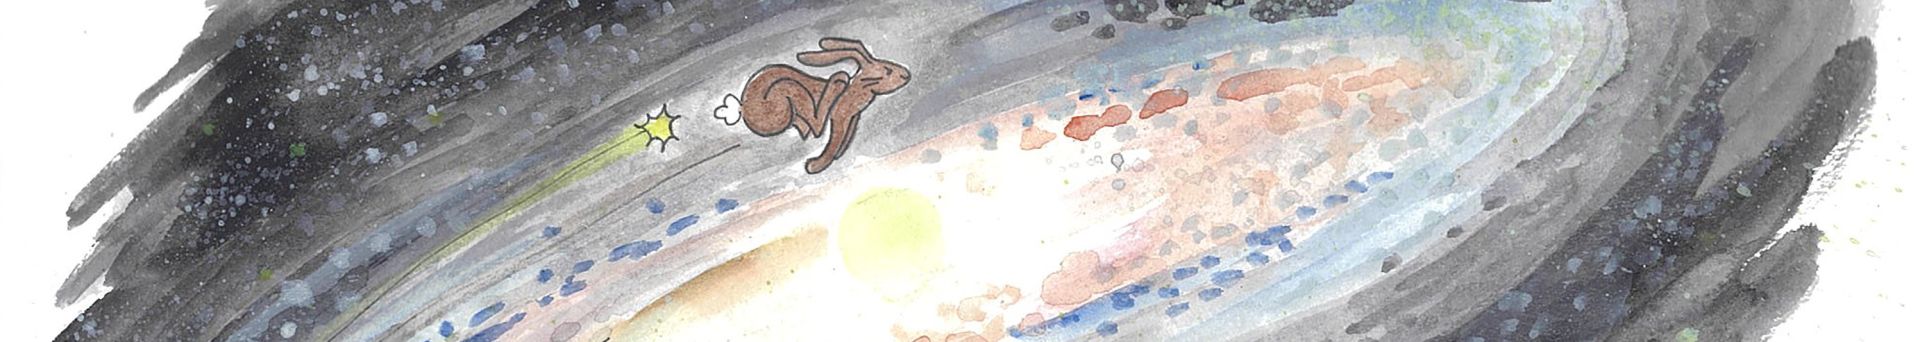 watercolor of a rabbit beating a shooting star in a race across the Milky Way